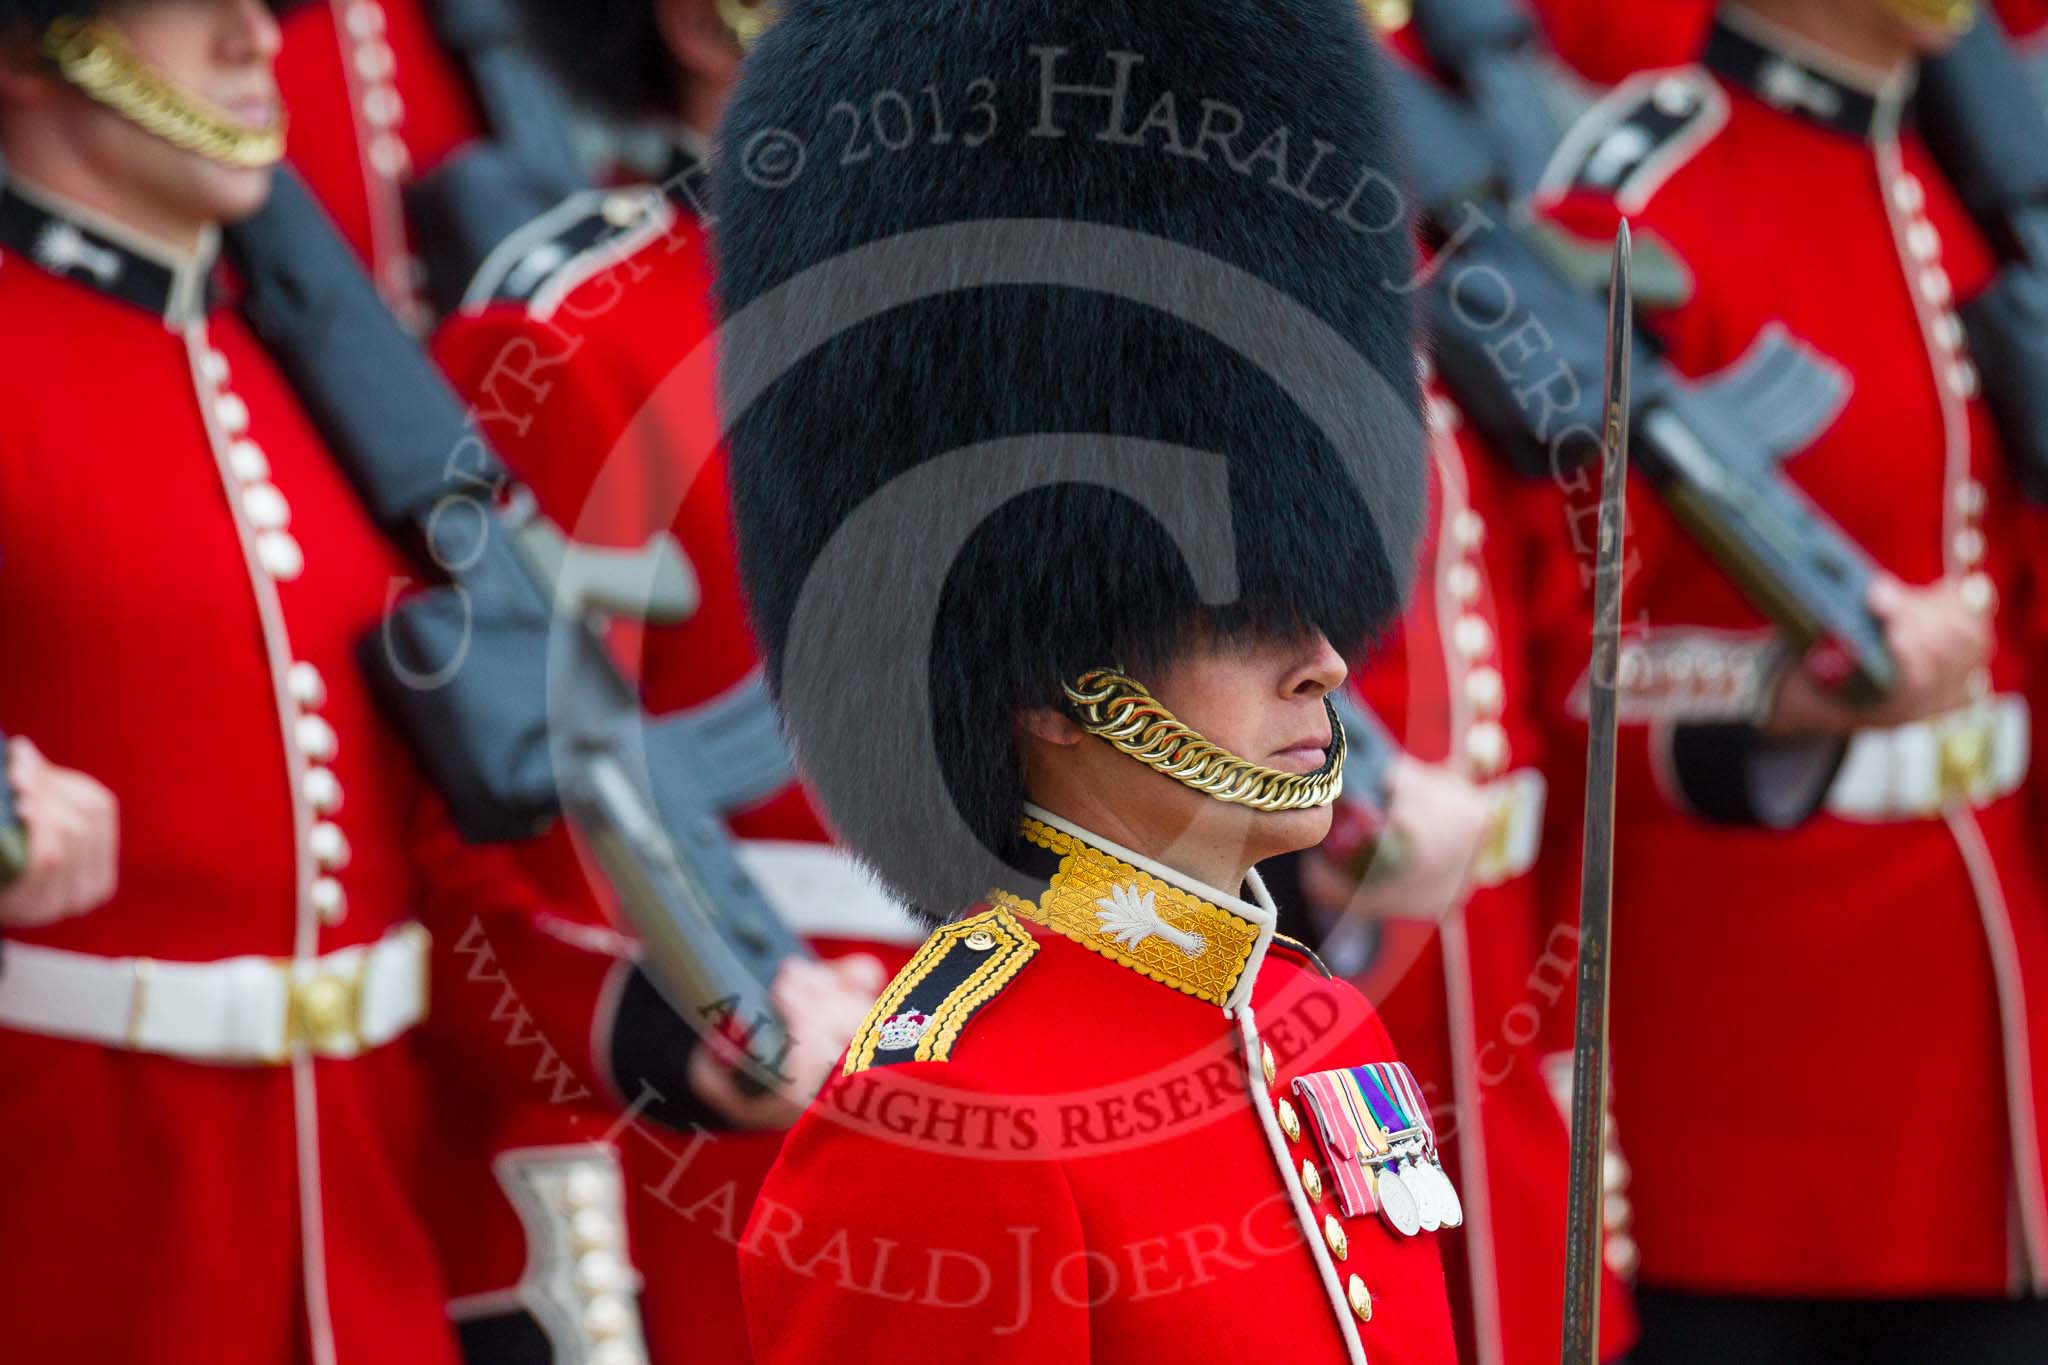 Trooping the Colour 2015. Image #454, 13 June 2015 11:35 Horse Guards Parade, London, UK